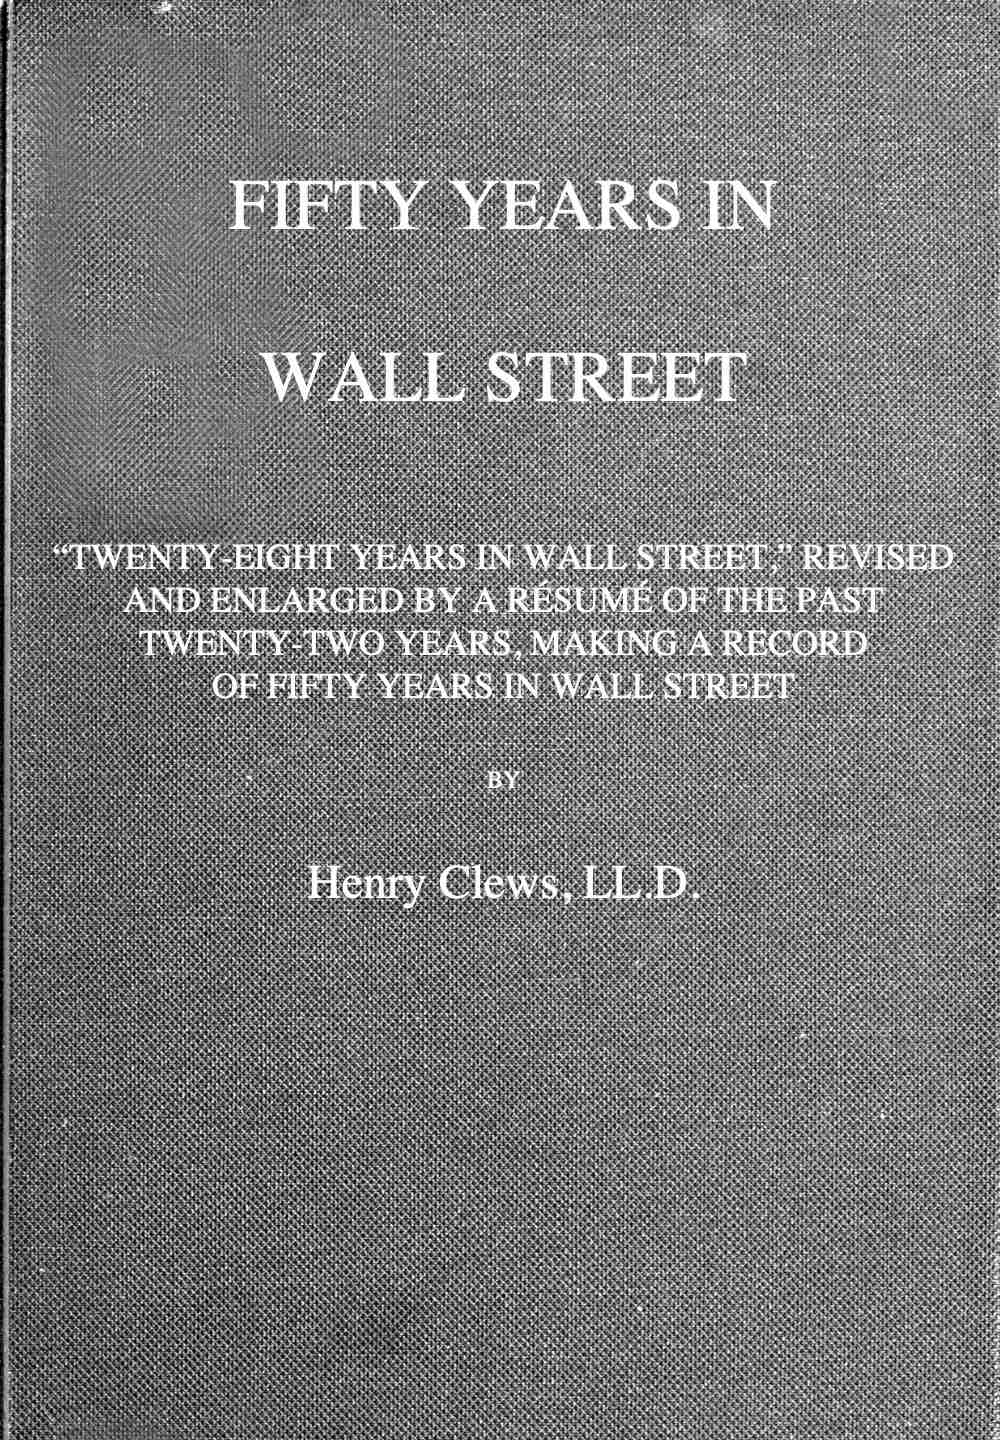 Fifty Years in Wall Street Henry Clews, LL.D. picture image